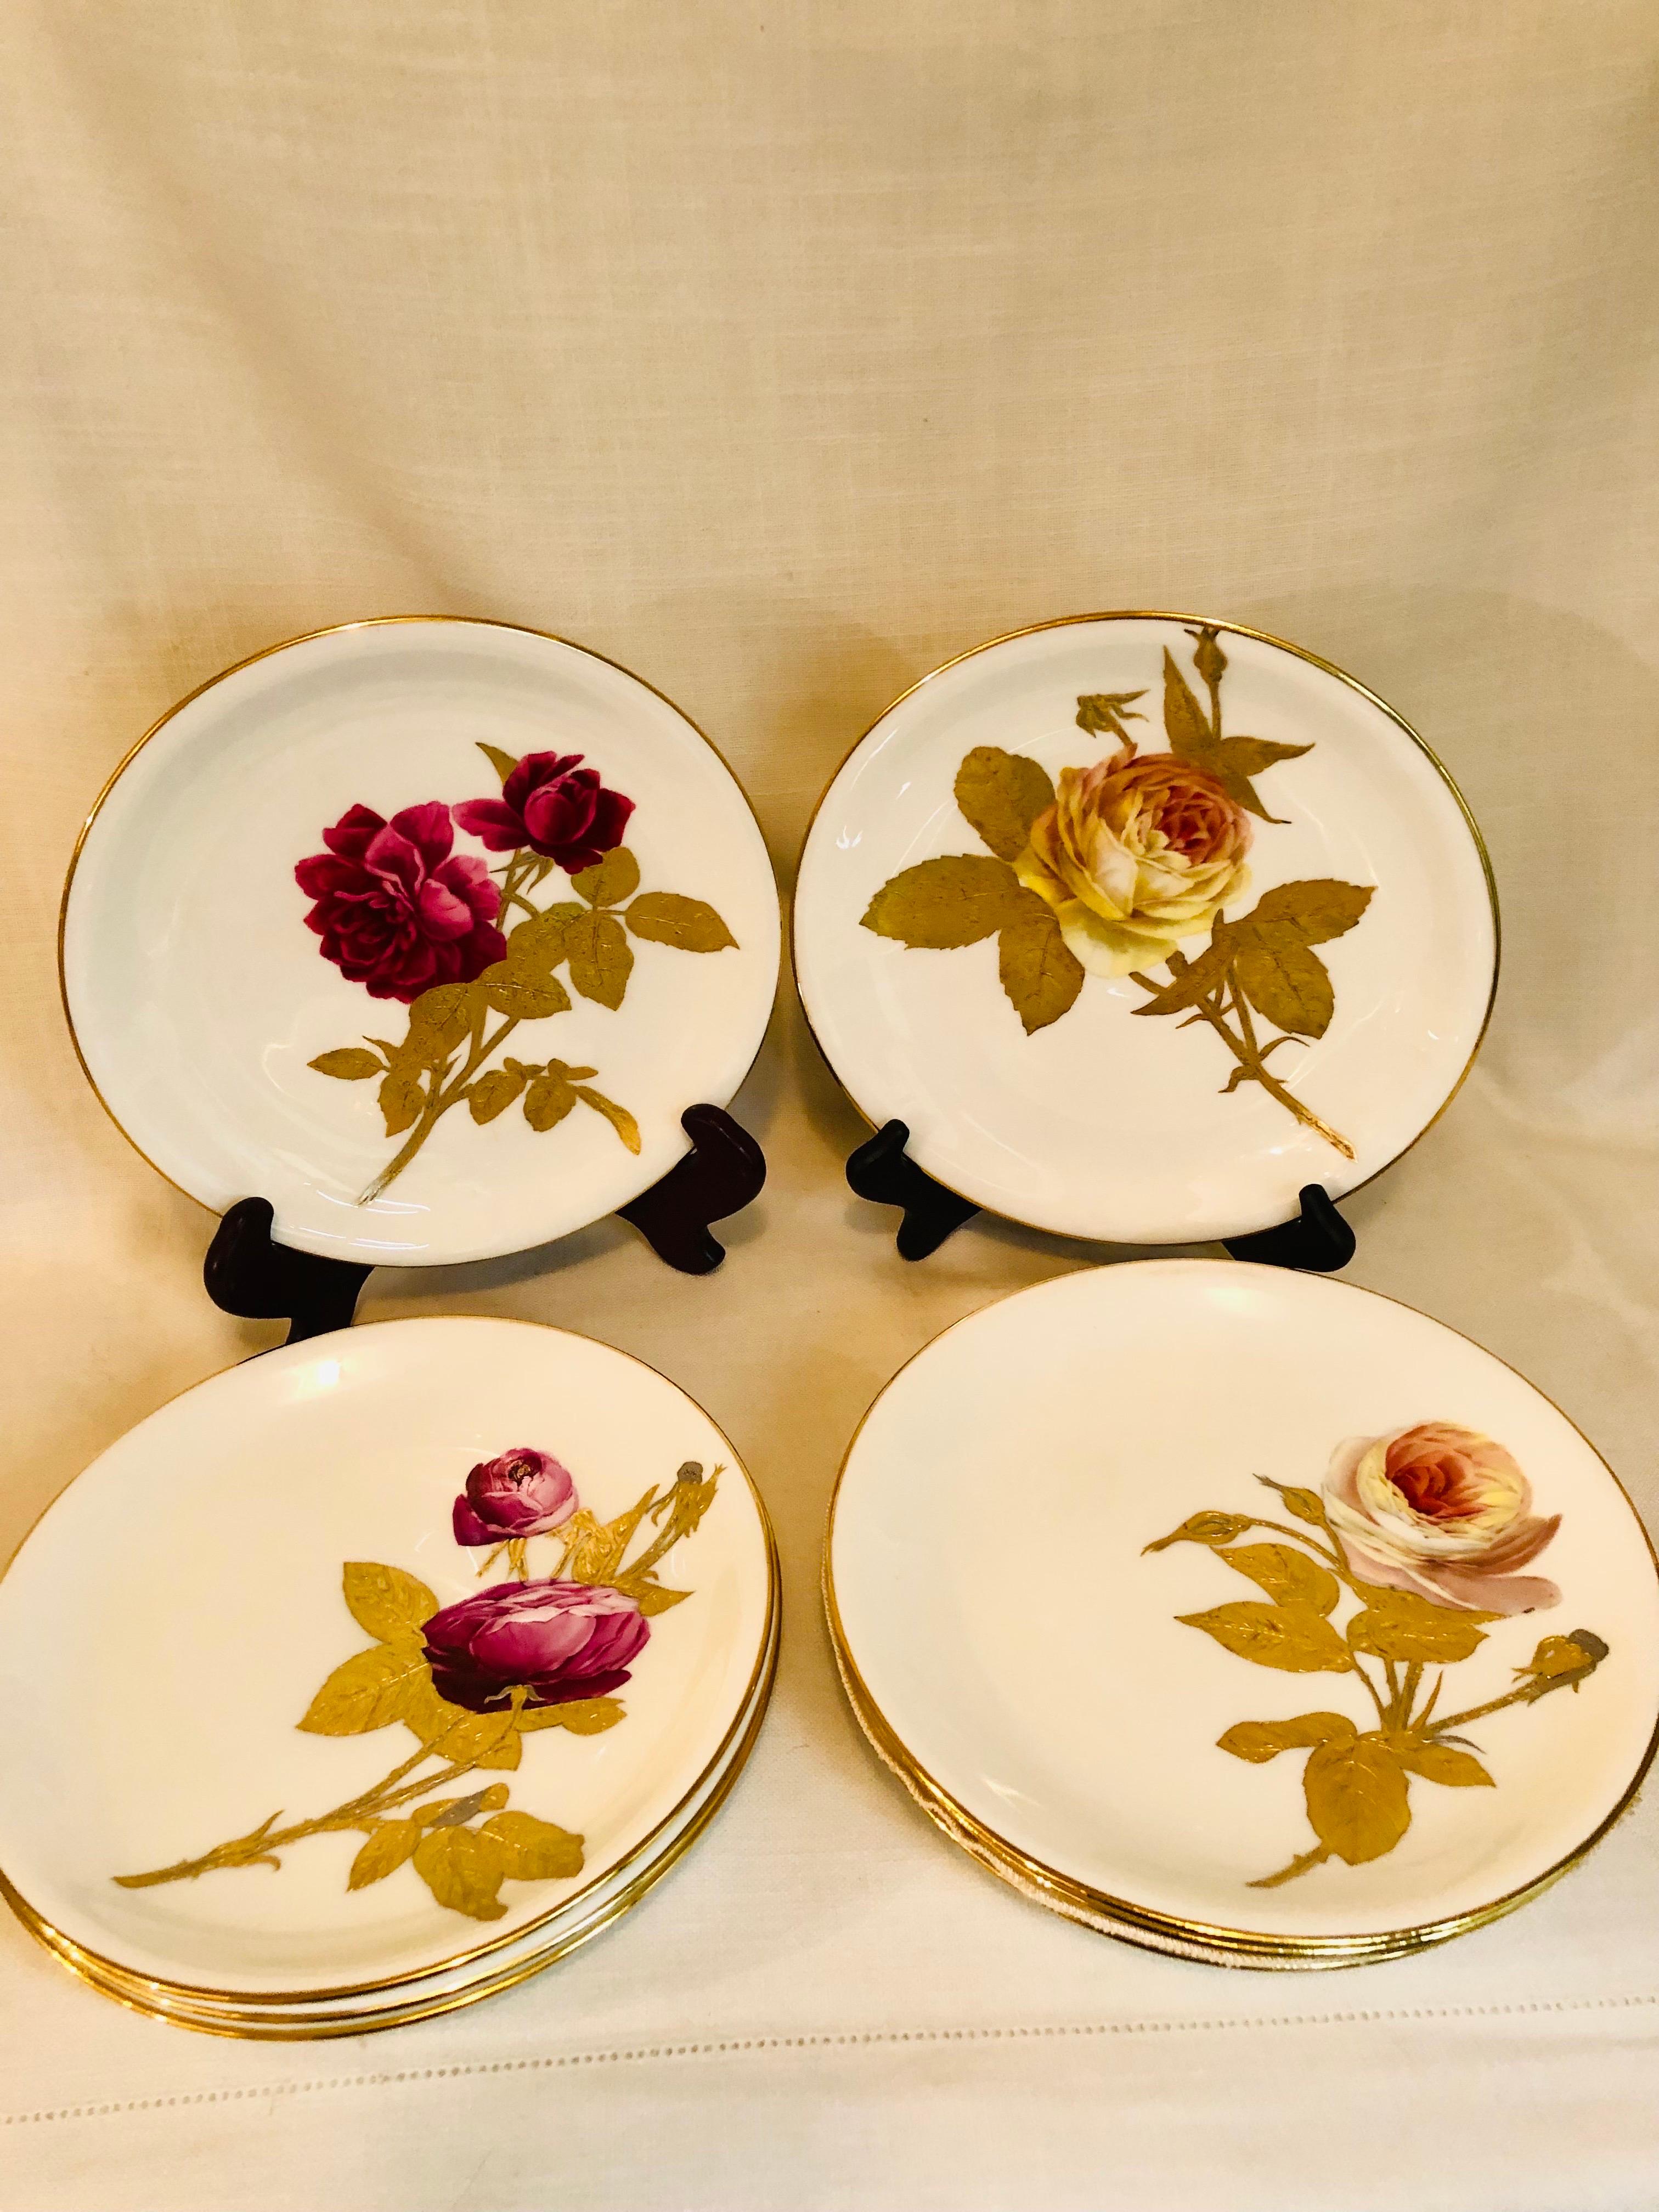 This is a stunning rare set of nine Minton rose plates. I have never seen roses painted more beautifully than on these plates. There are yellow, pink, white and red roses on these plates. Each plate has a different rose painting each having raised